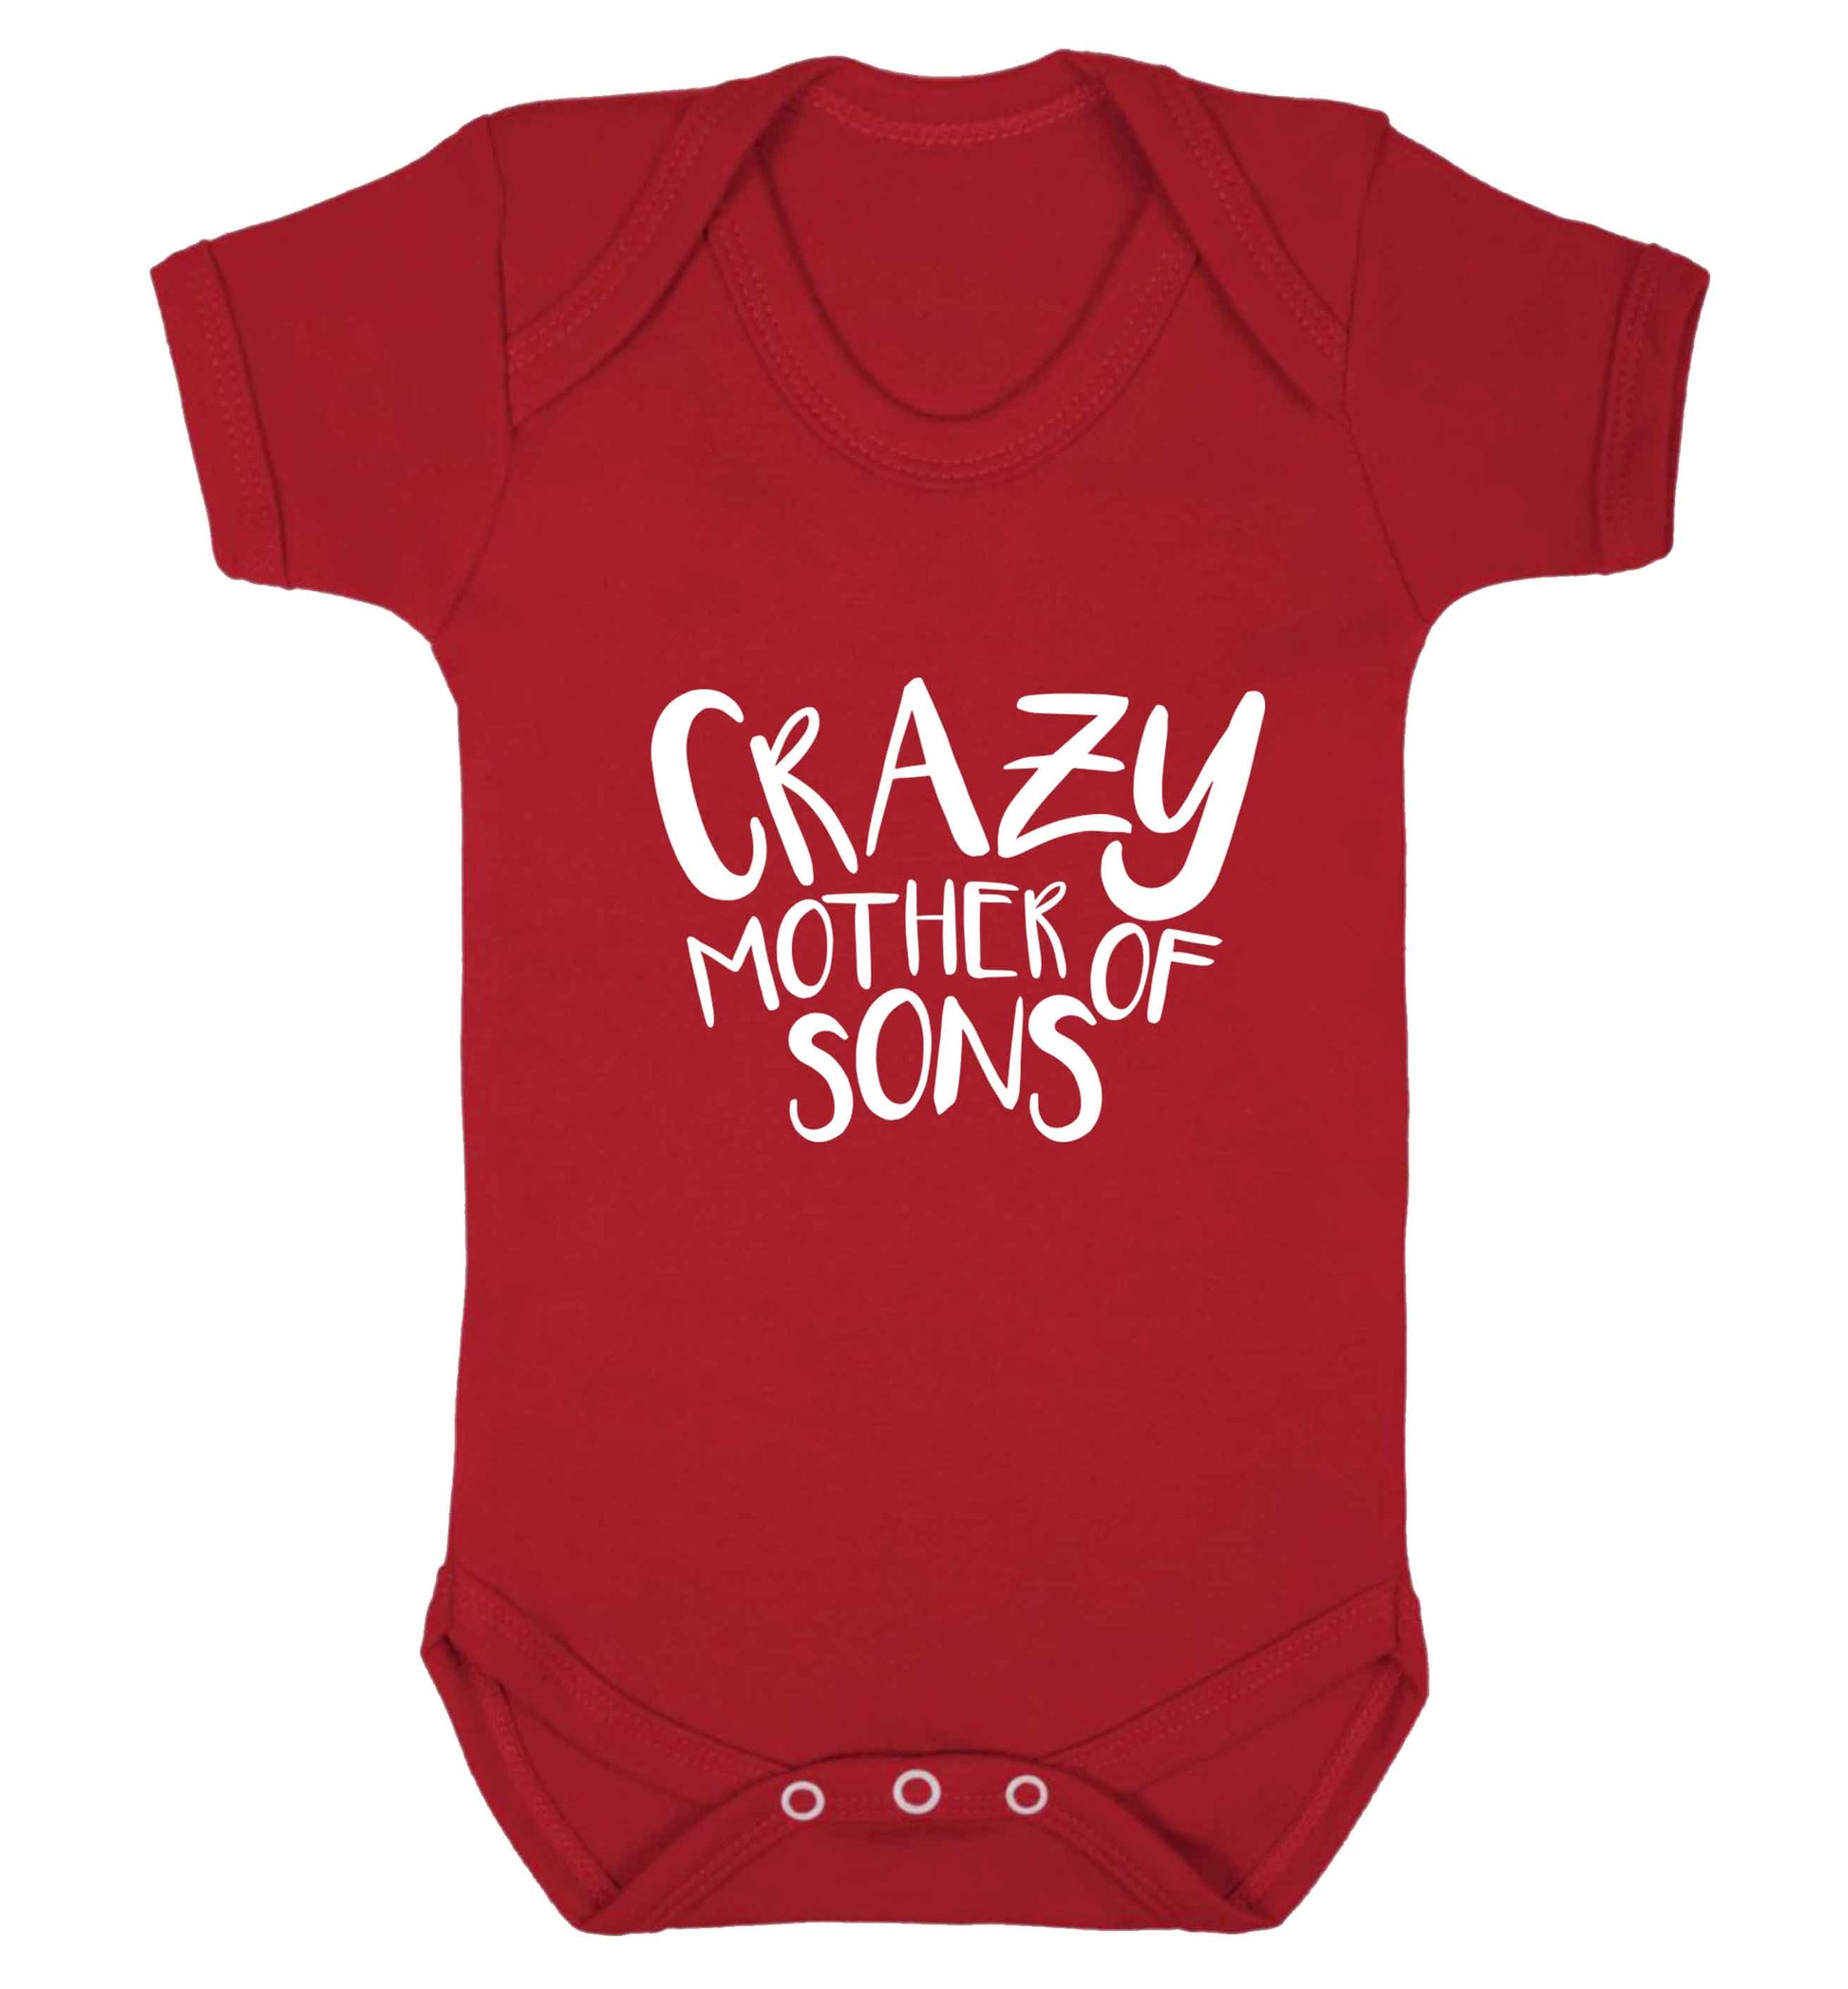 Crazy mother of sons baby vest red 18-24 months